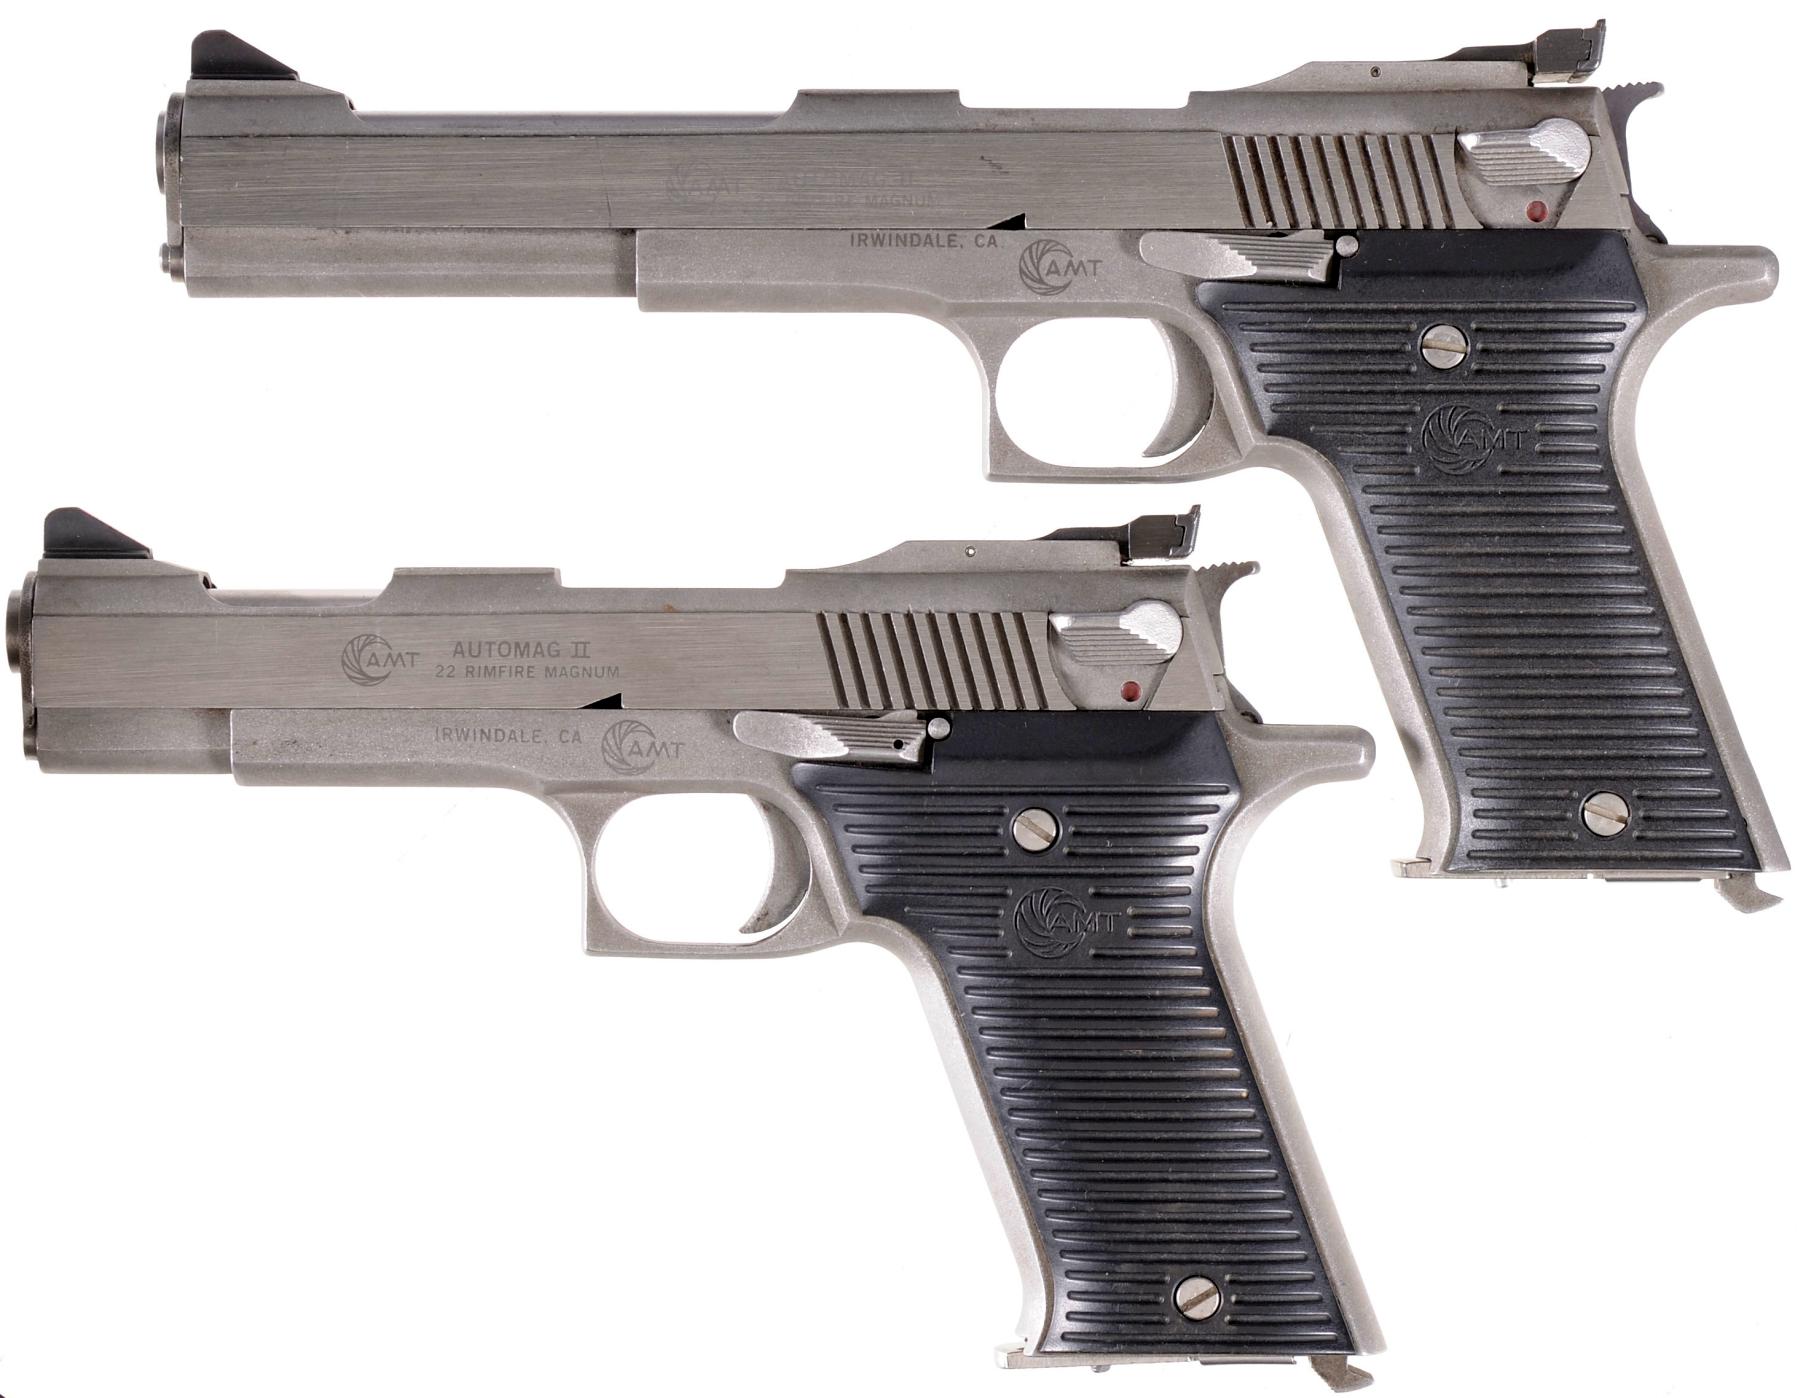 Two AMT Automag II Semi-Automatic Pistols Rock Island Auction.